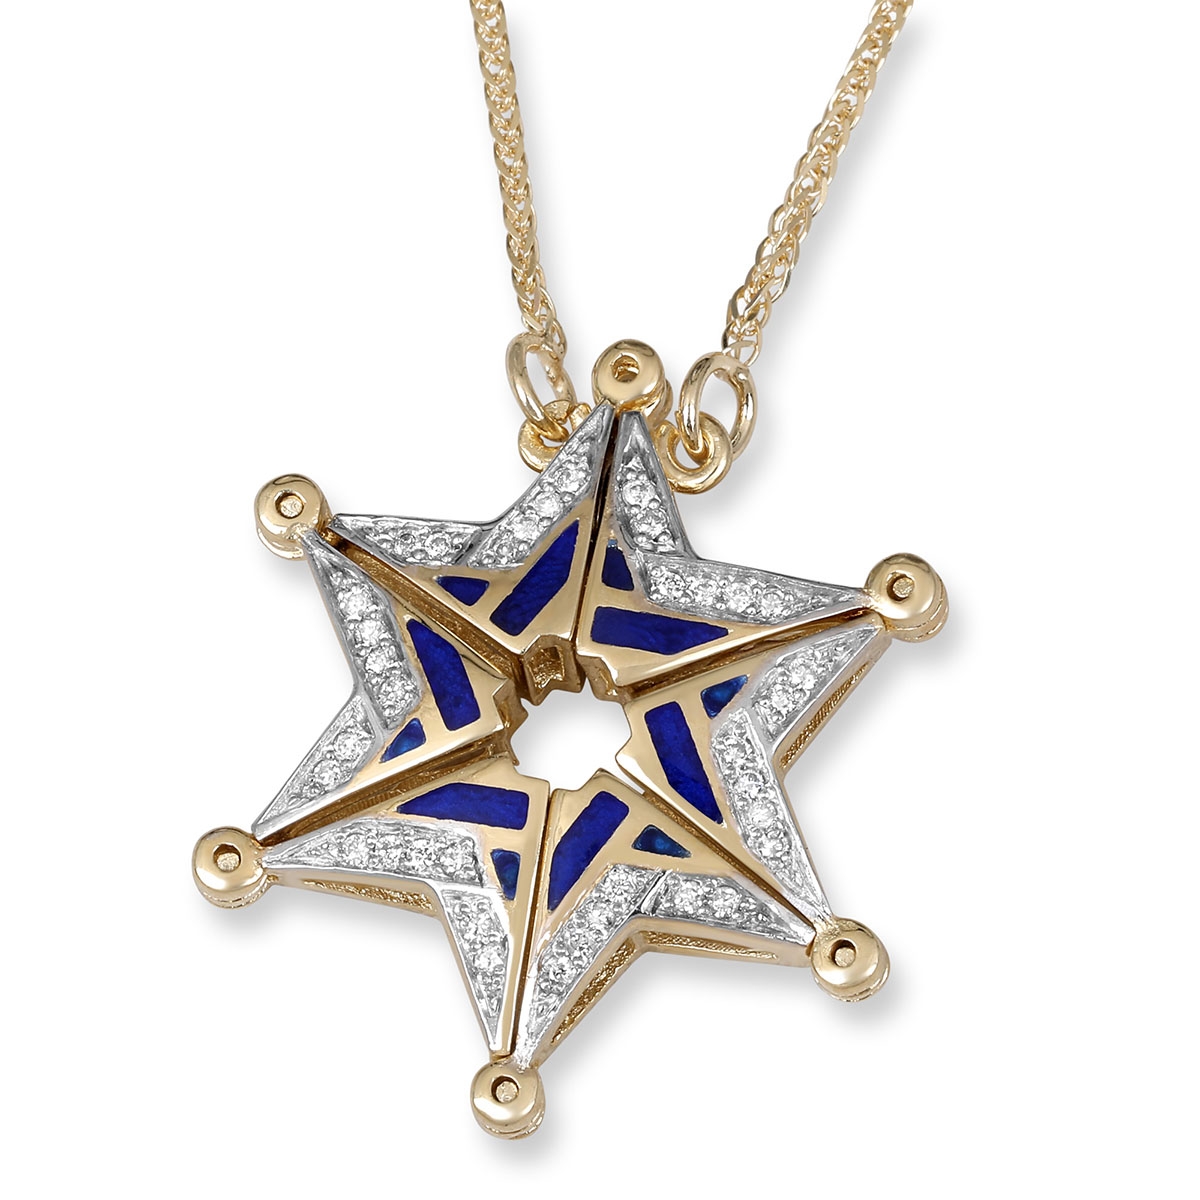 Anbinder Jewelry 14K Yellow Gold Openable Star of David Necklace With White Diamonds and Blue Enamel - 1